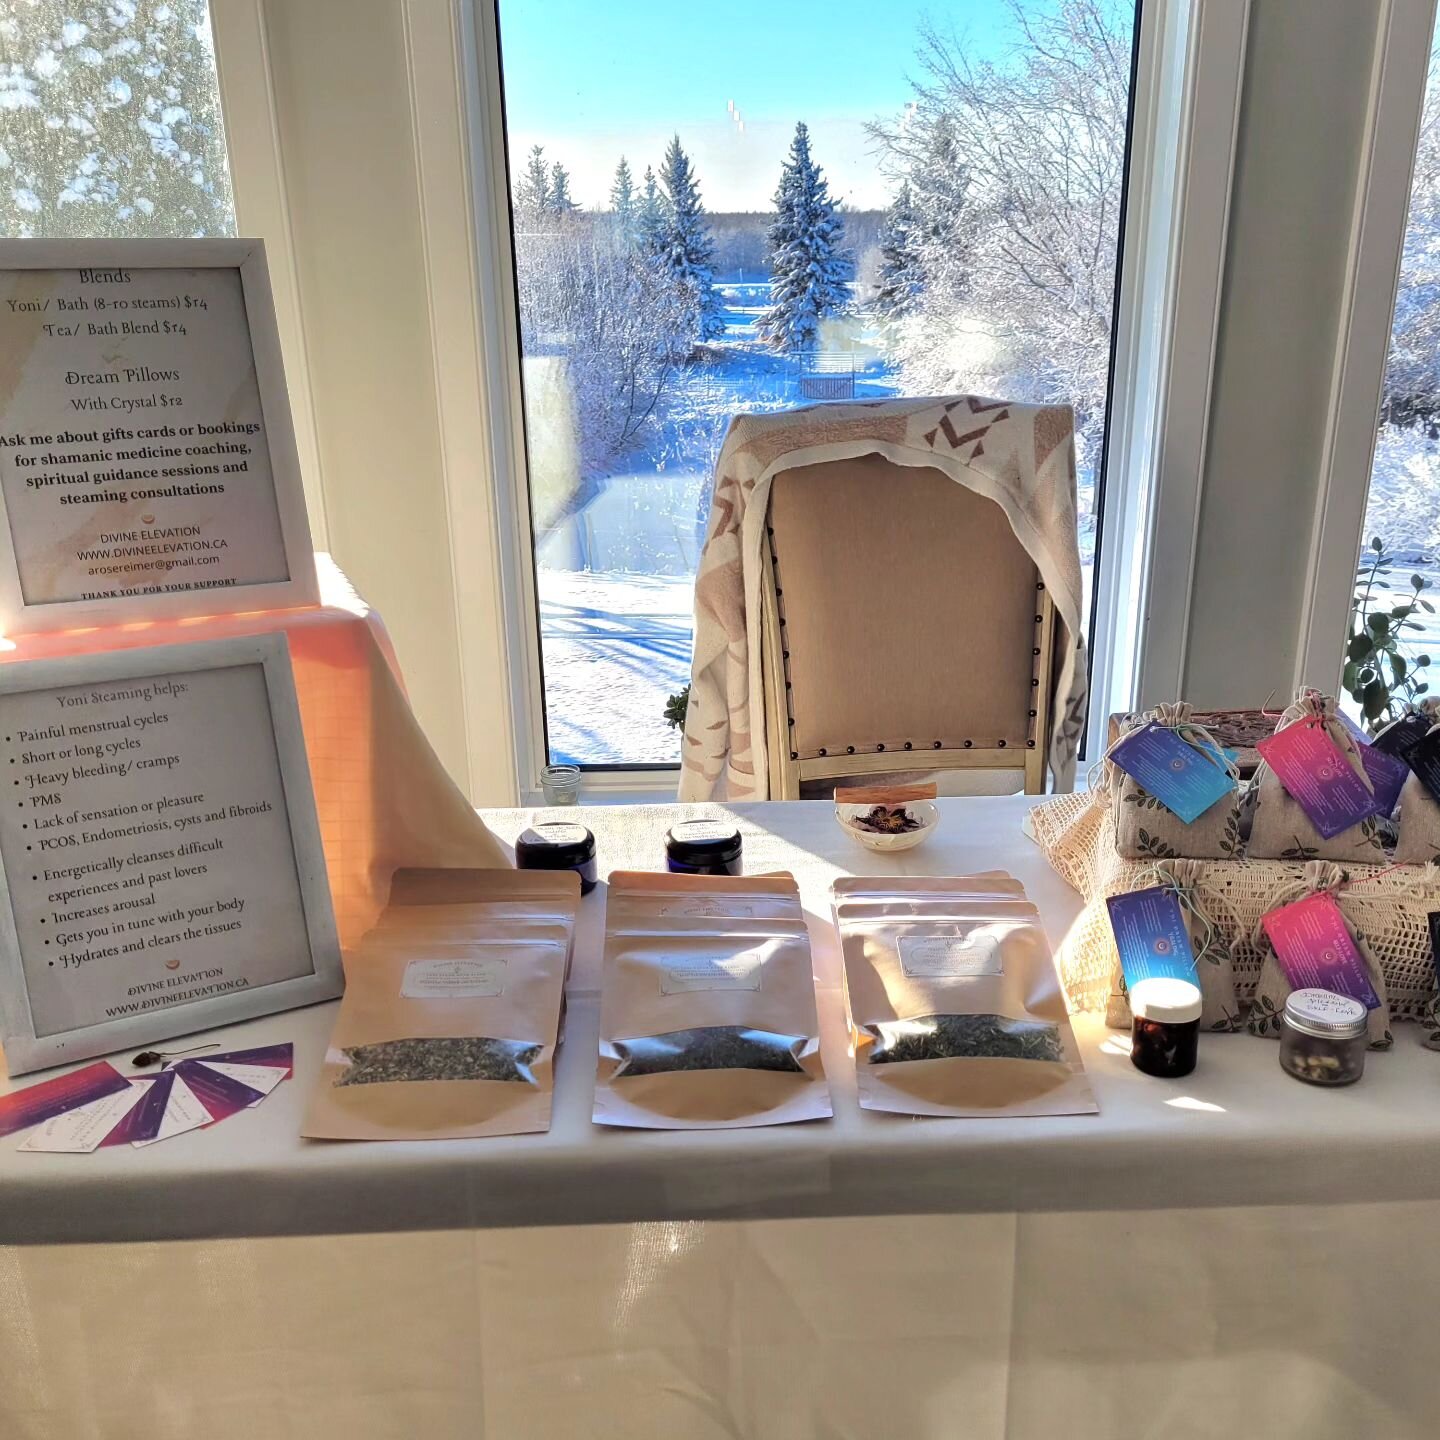 All set up in the cozy winter land @rising.moon.studio for the market today. 

Dream Pillows and herbal blends are all freshly made, smelling beautiful and ready for you take home💞

#yegevent #yegsmallbusiness #supportlocalyeg #herbalmagick #spiritu